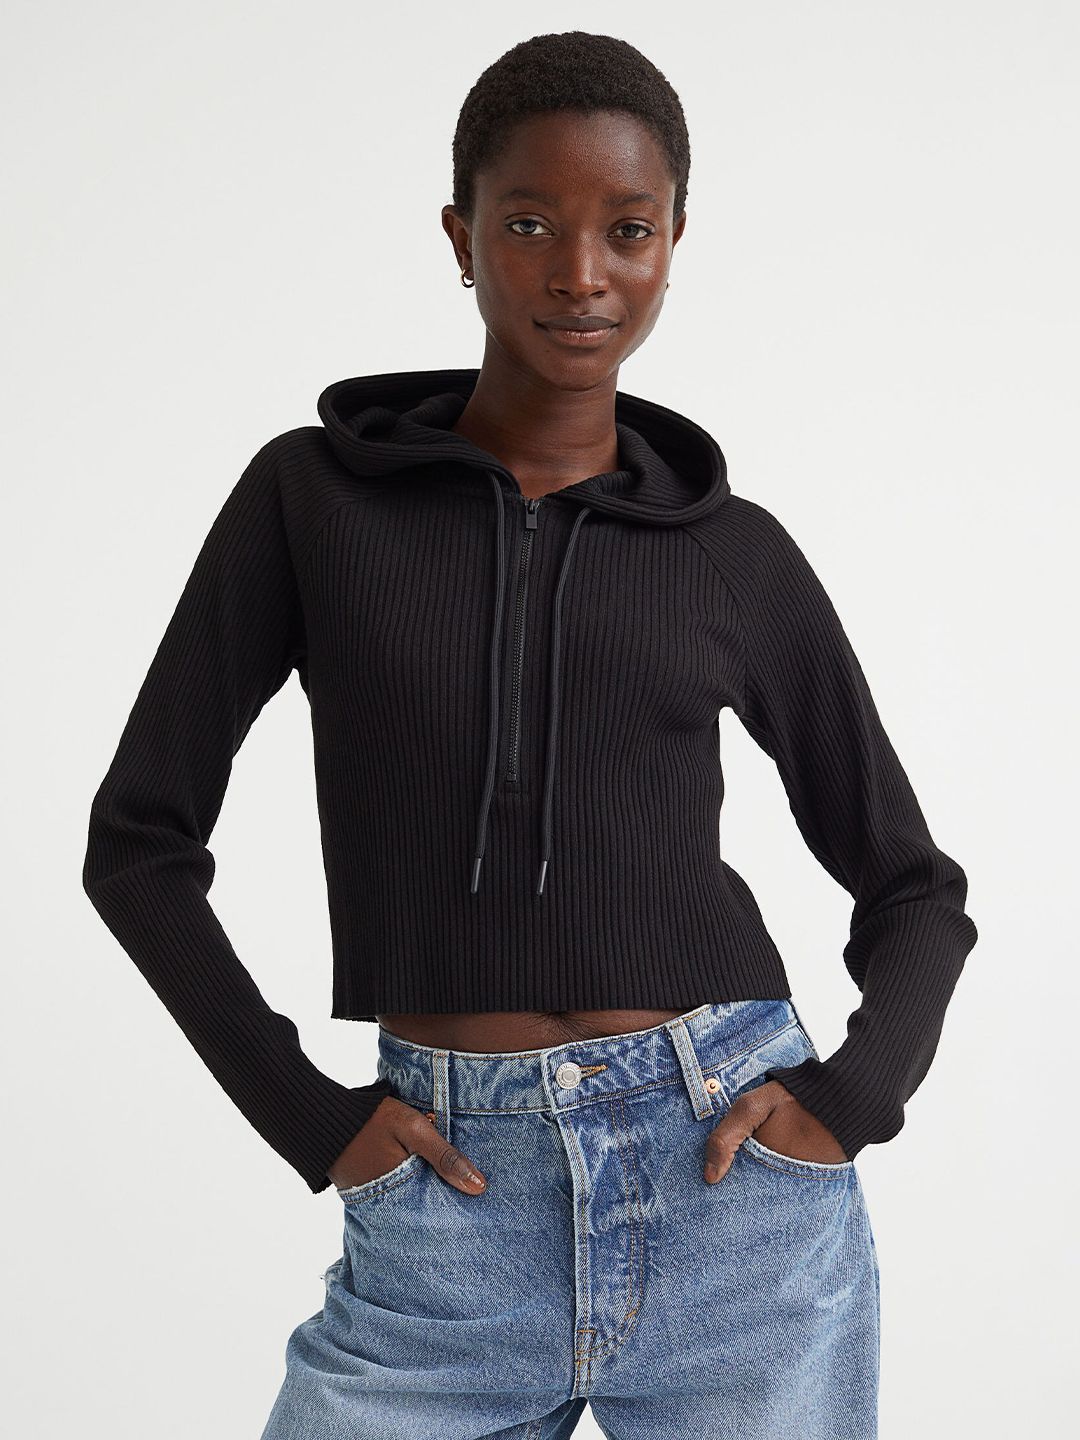 H&M Women Black Cropped Hoodie Price in India